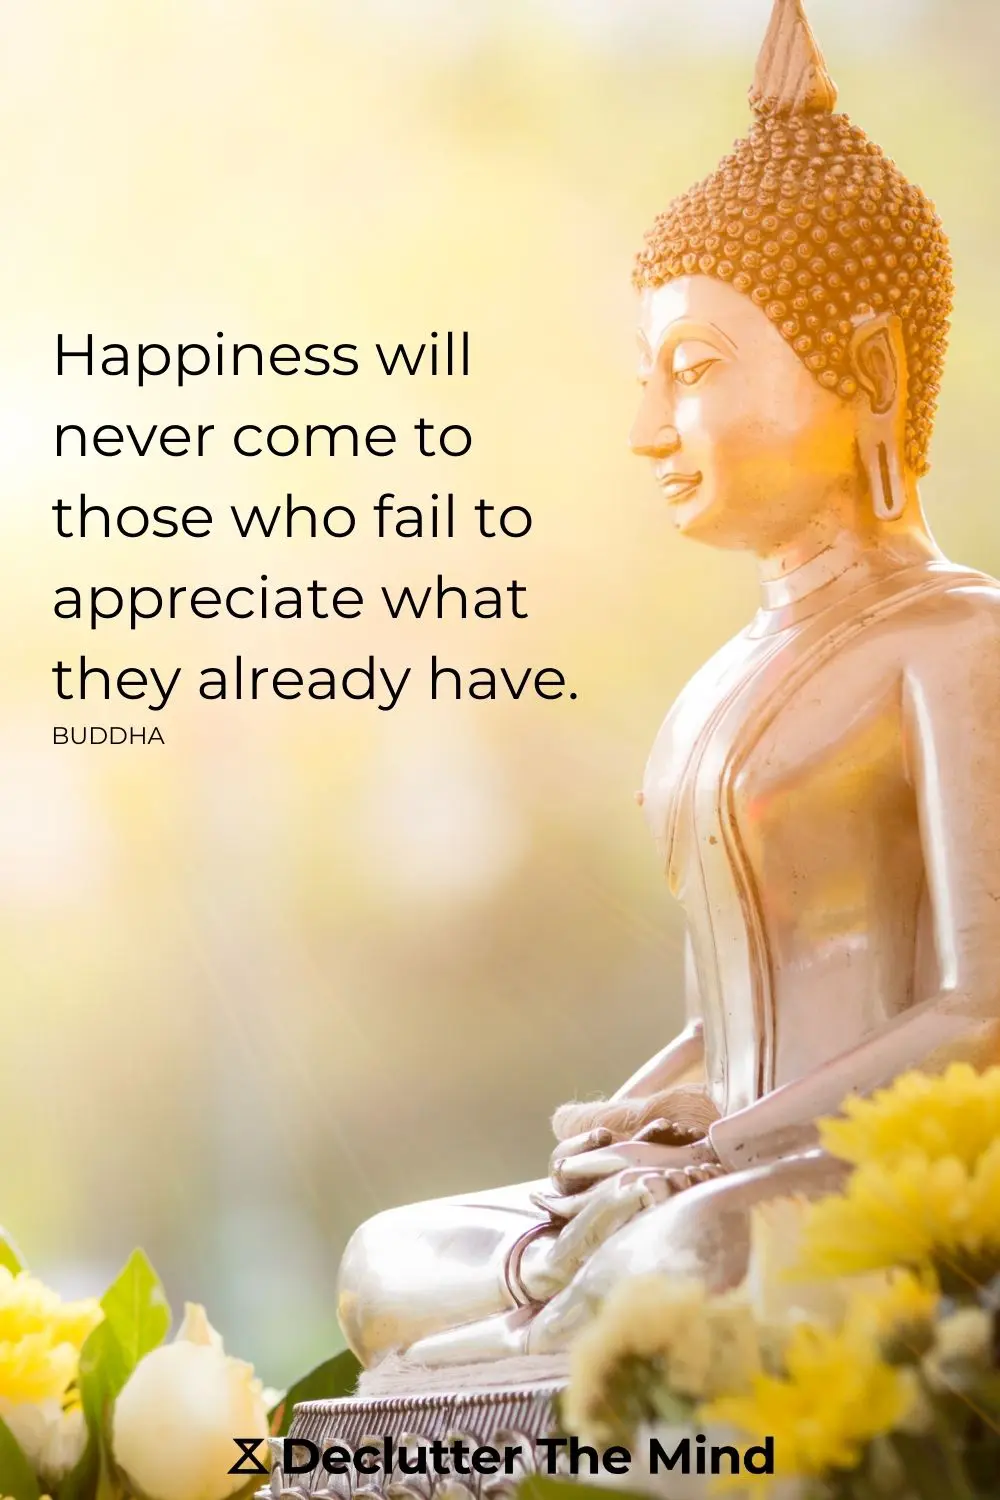 100+ Inspiring Buddha Quotes on Life and Meditation - Declutter The Mind